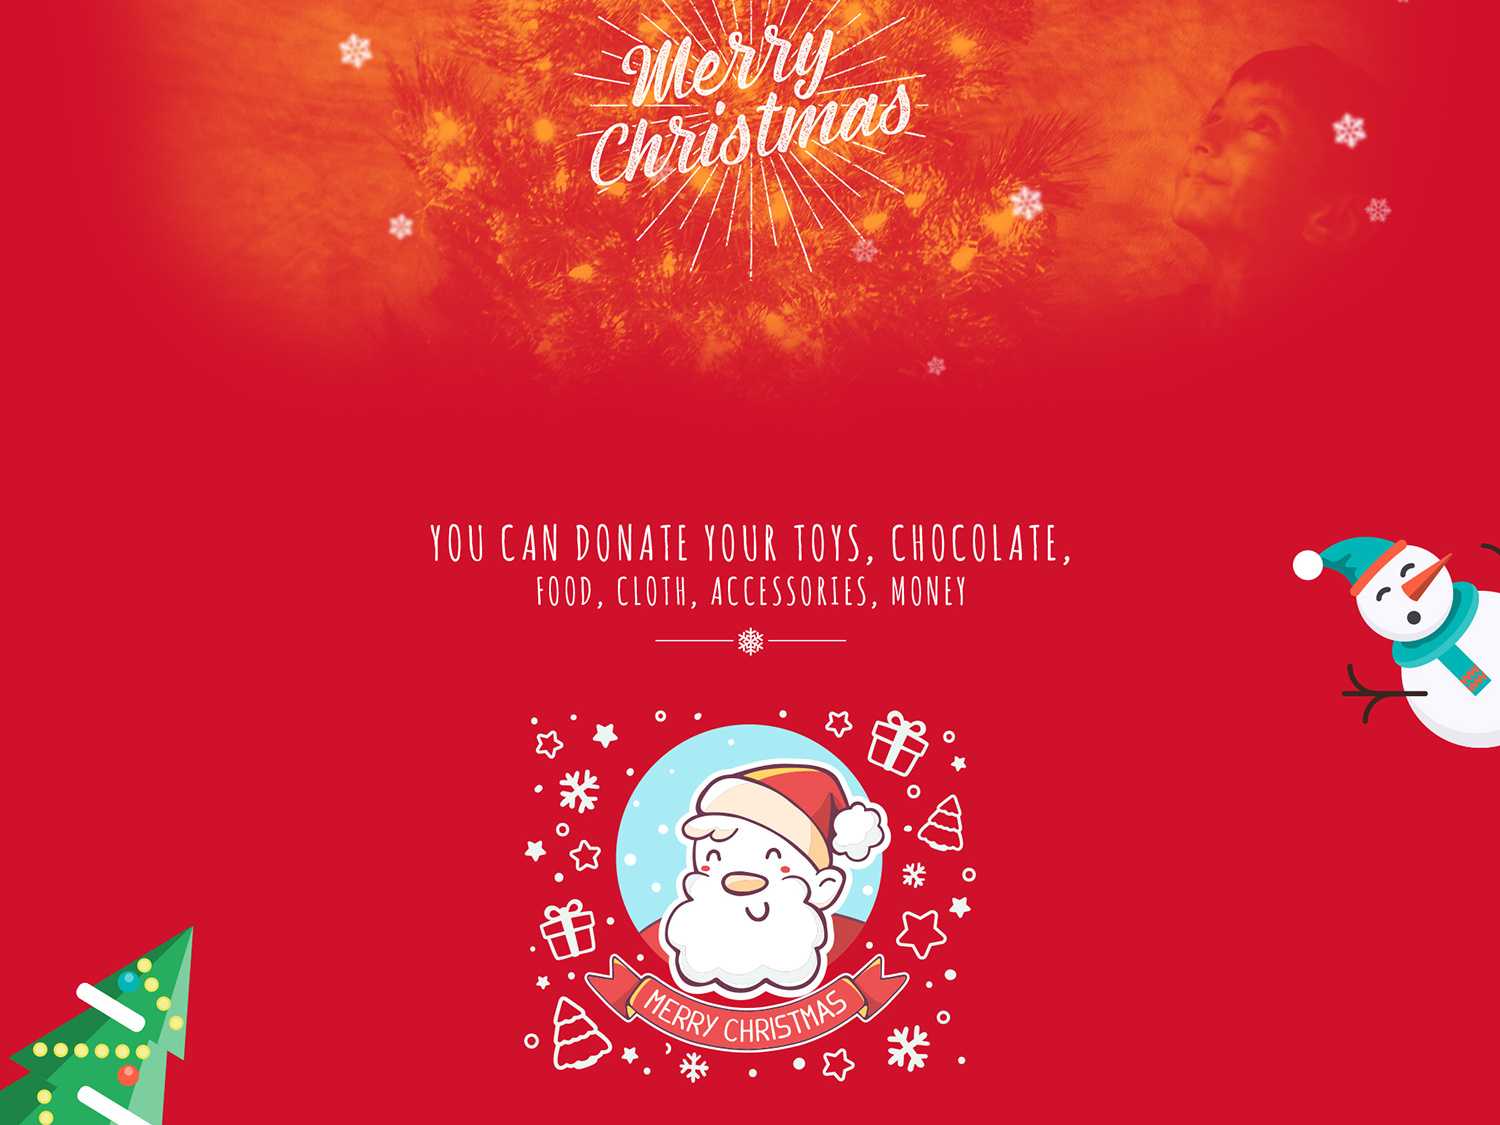 Free Holiday Webpage Psd Template Giveawayartbees On Pertaining To Free Holiday Photo Card Templates